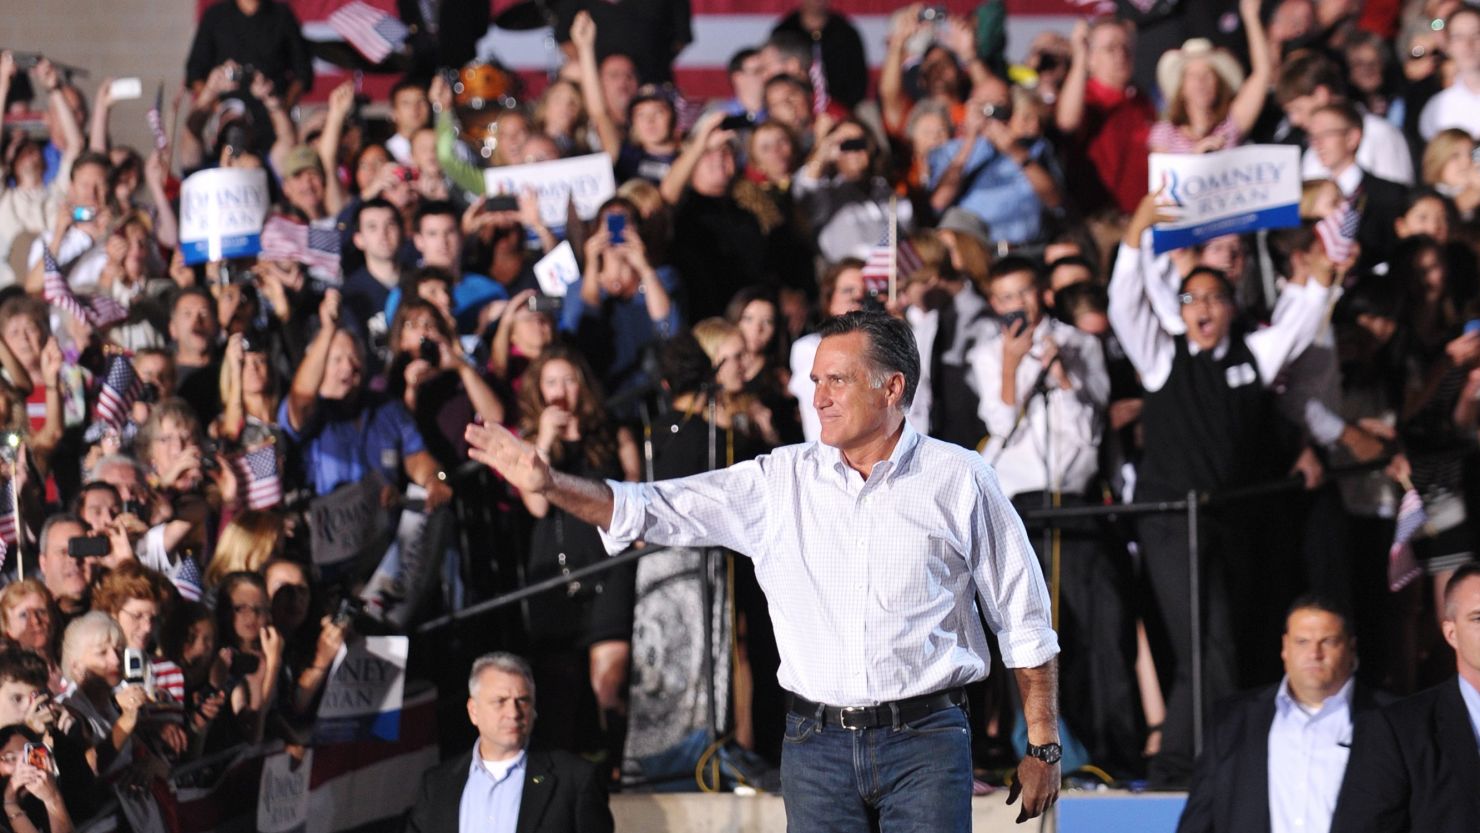 Could smart decisions, combined with a few favorable circumstances, propel Mitt Romney to an upset victory?